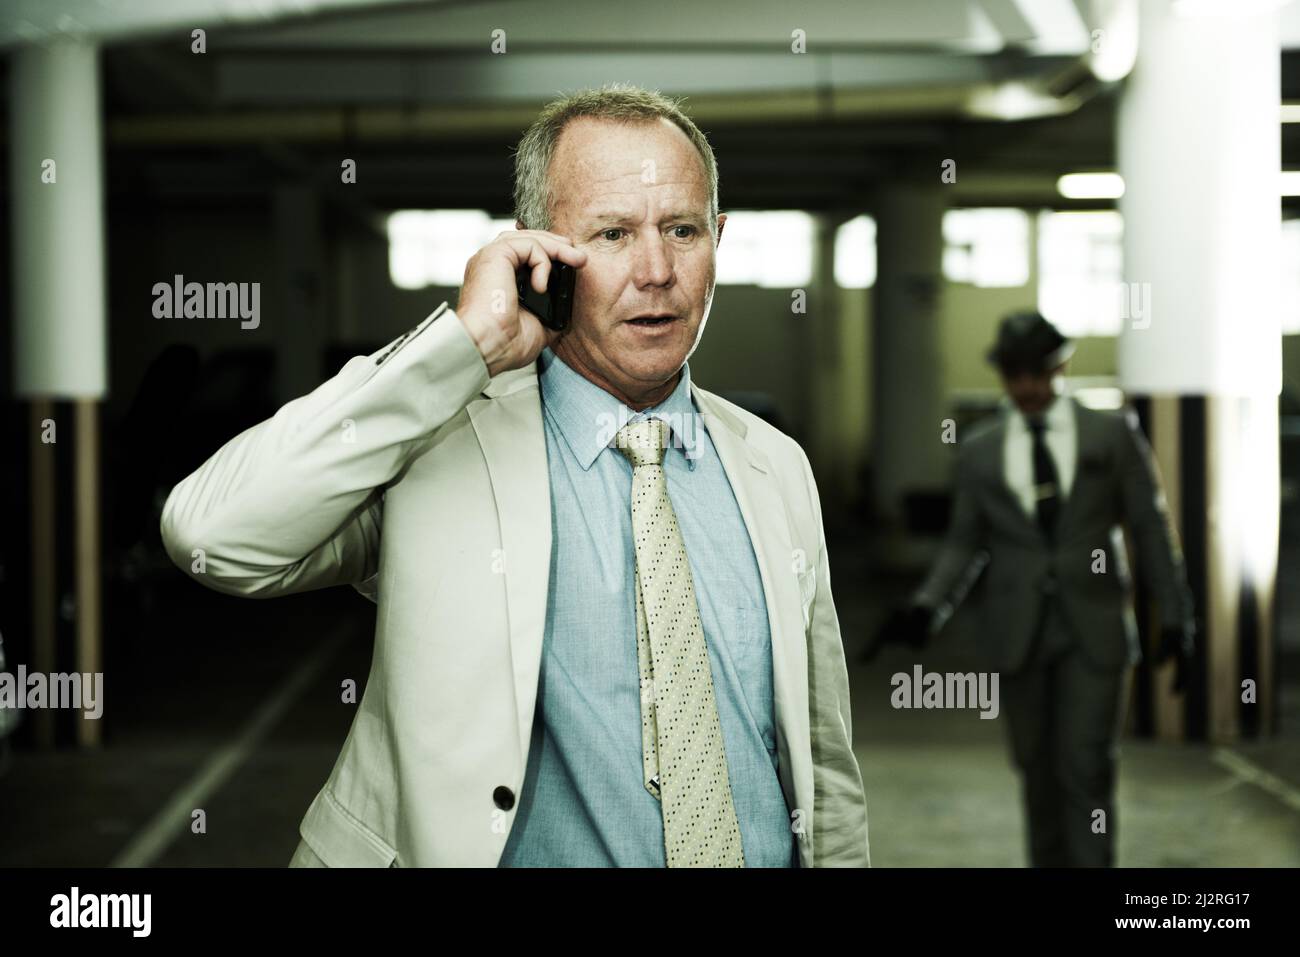 Completely unaware his life is about to change. An oblivious businessman talking on his cellphone as an armed assailant approaches from the shadows in Stock Photo